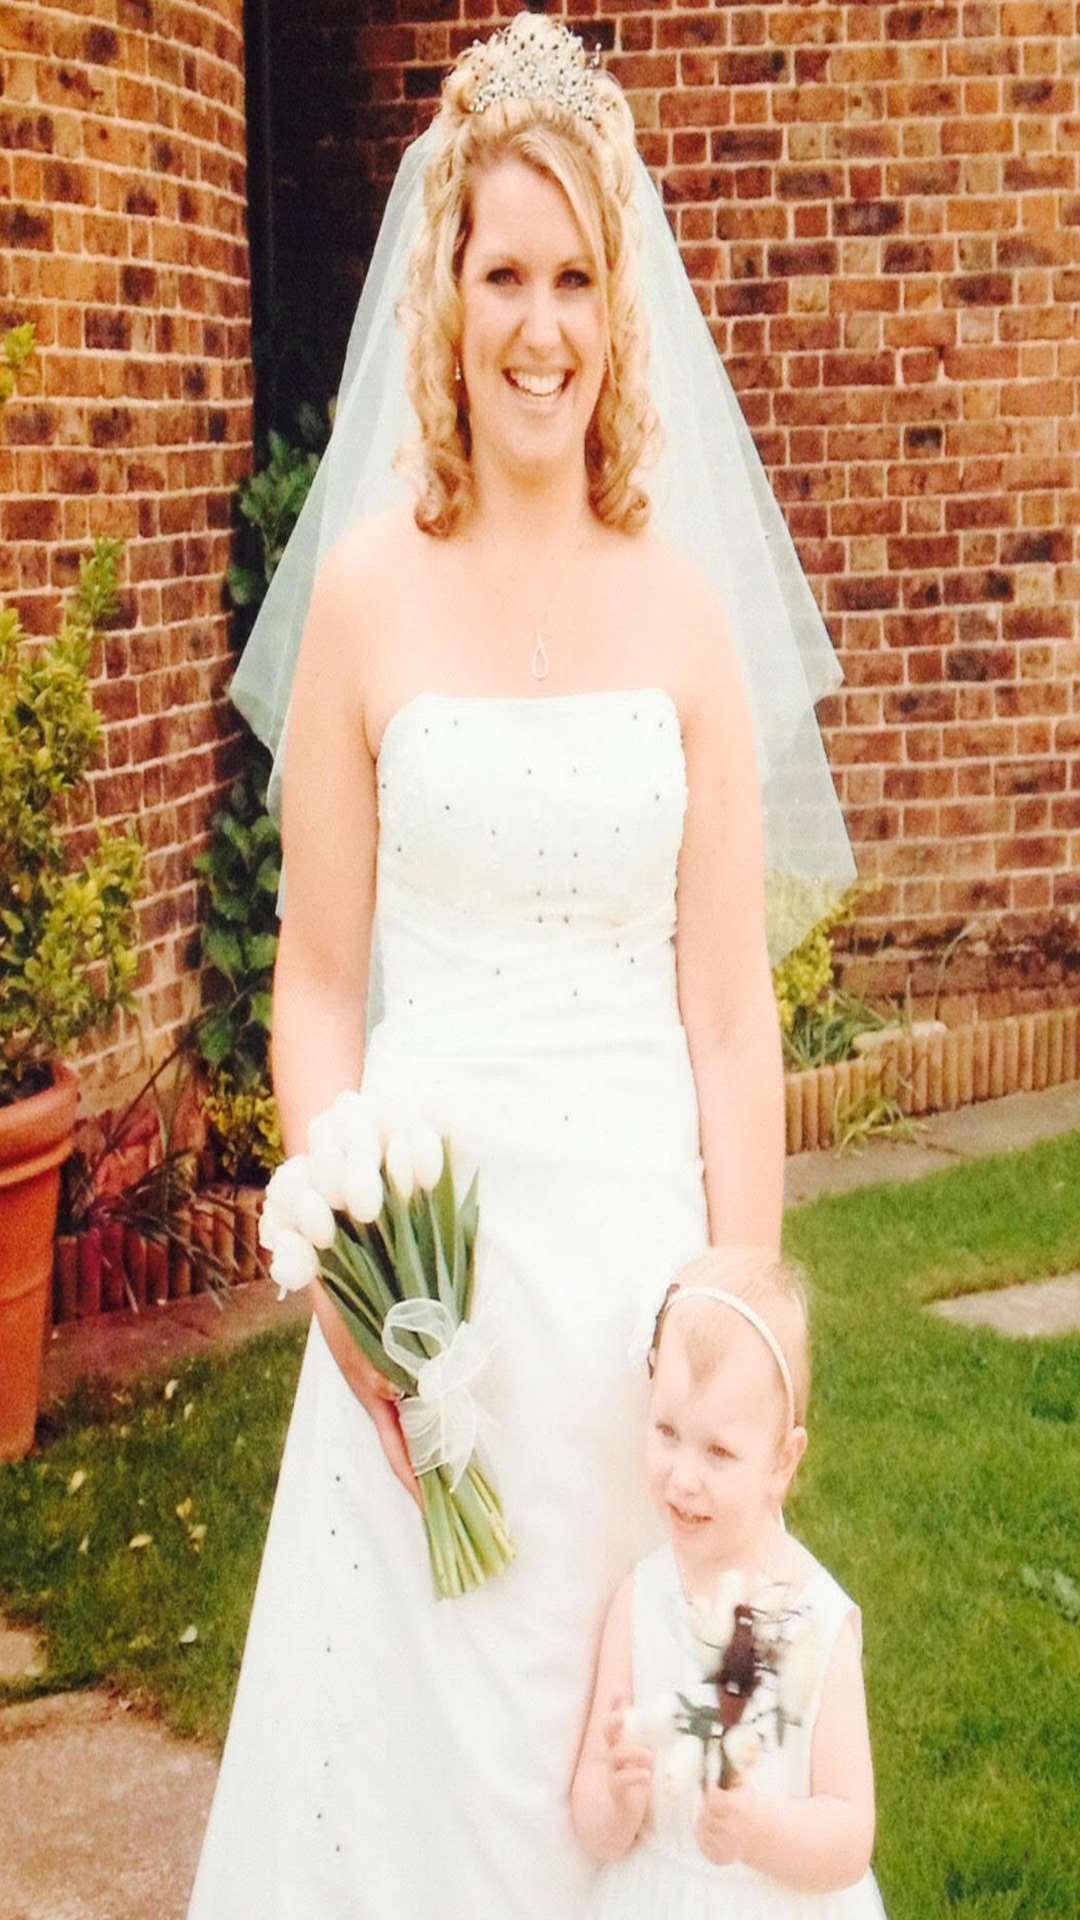 Donna on her wedding day with daughter Amelia